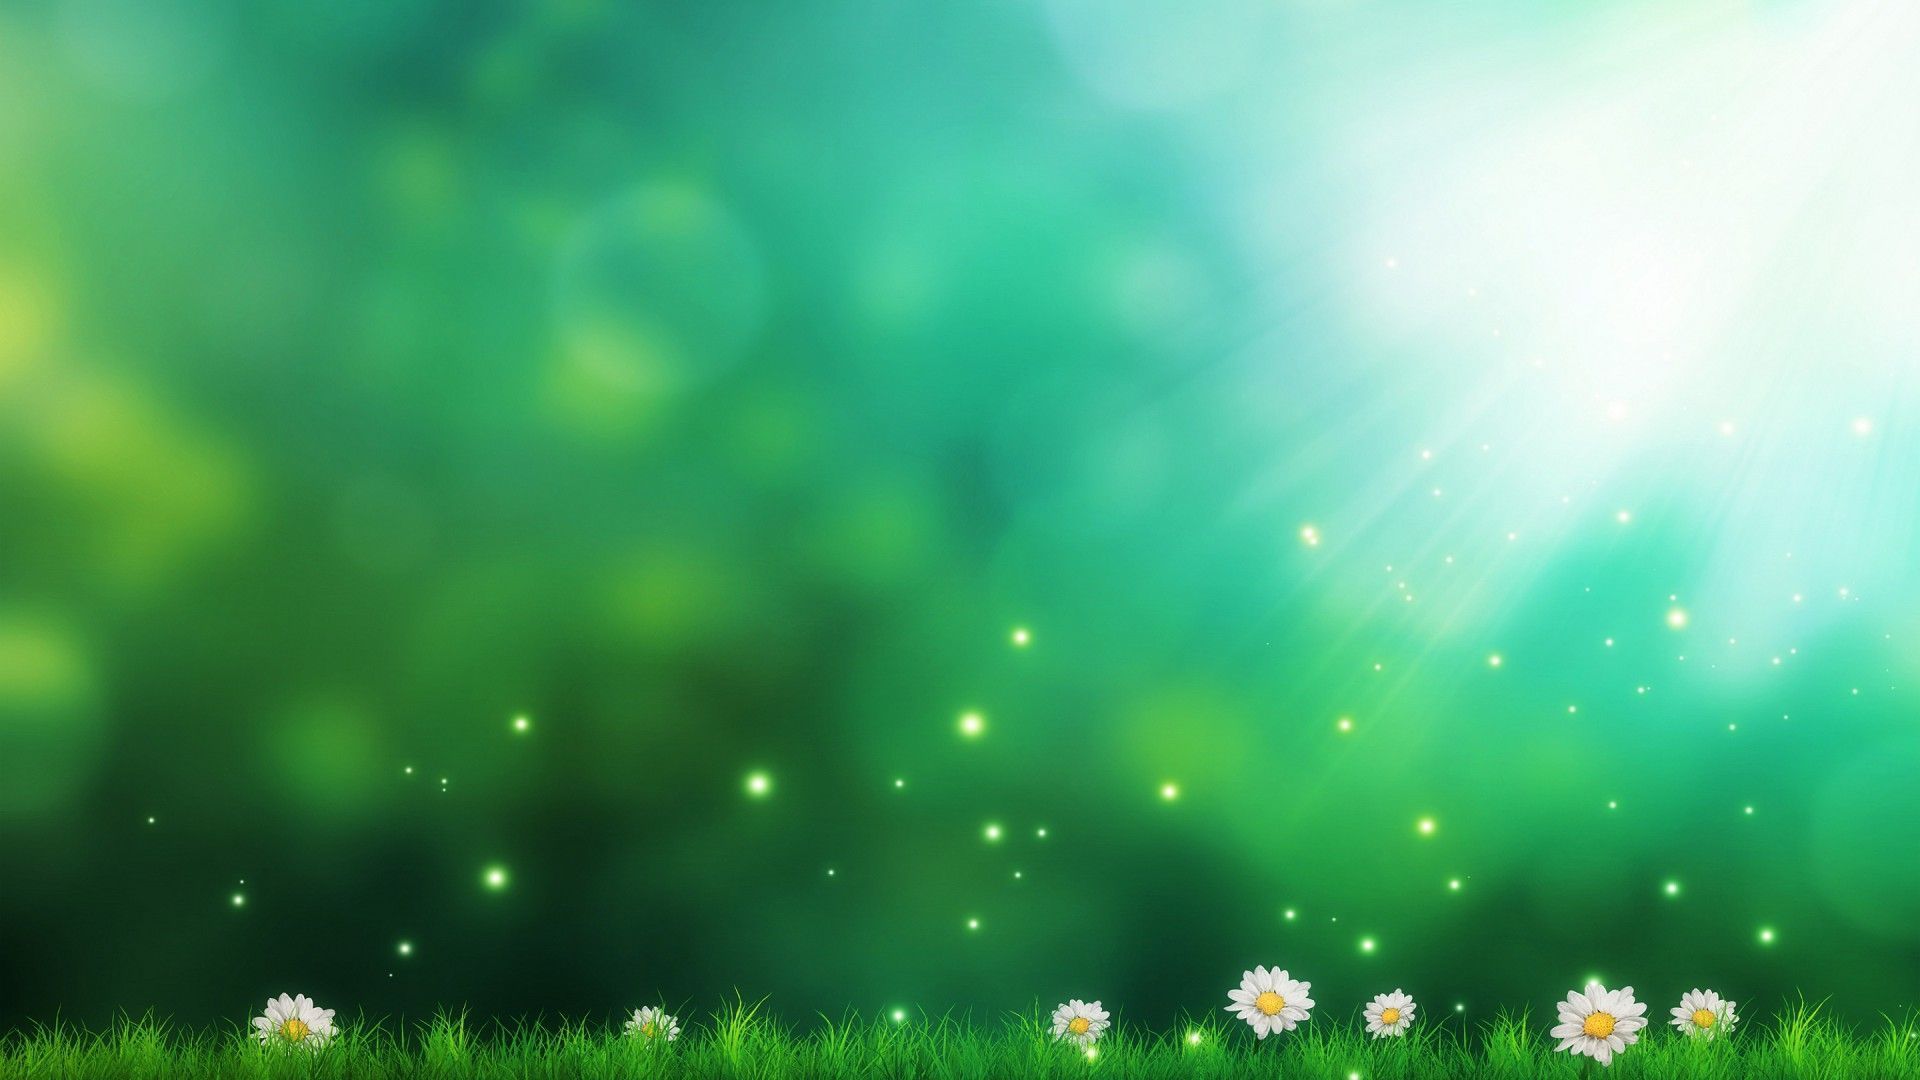 Daisies Green Background | HD Wallpapers